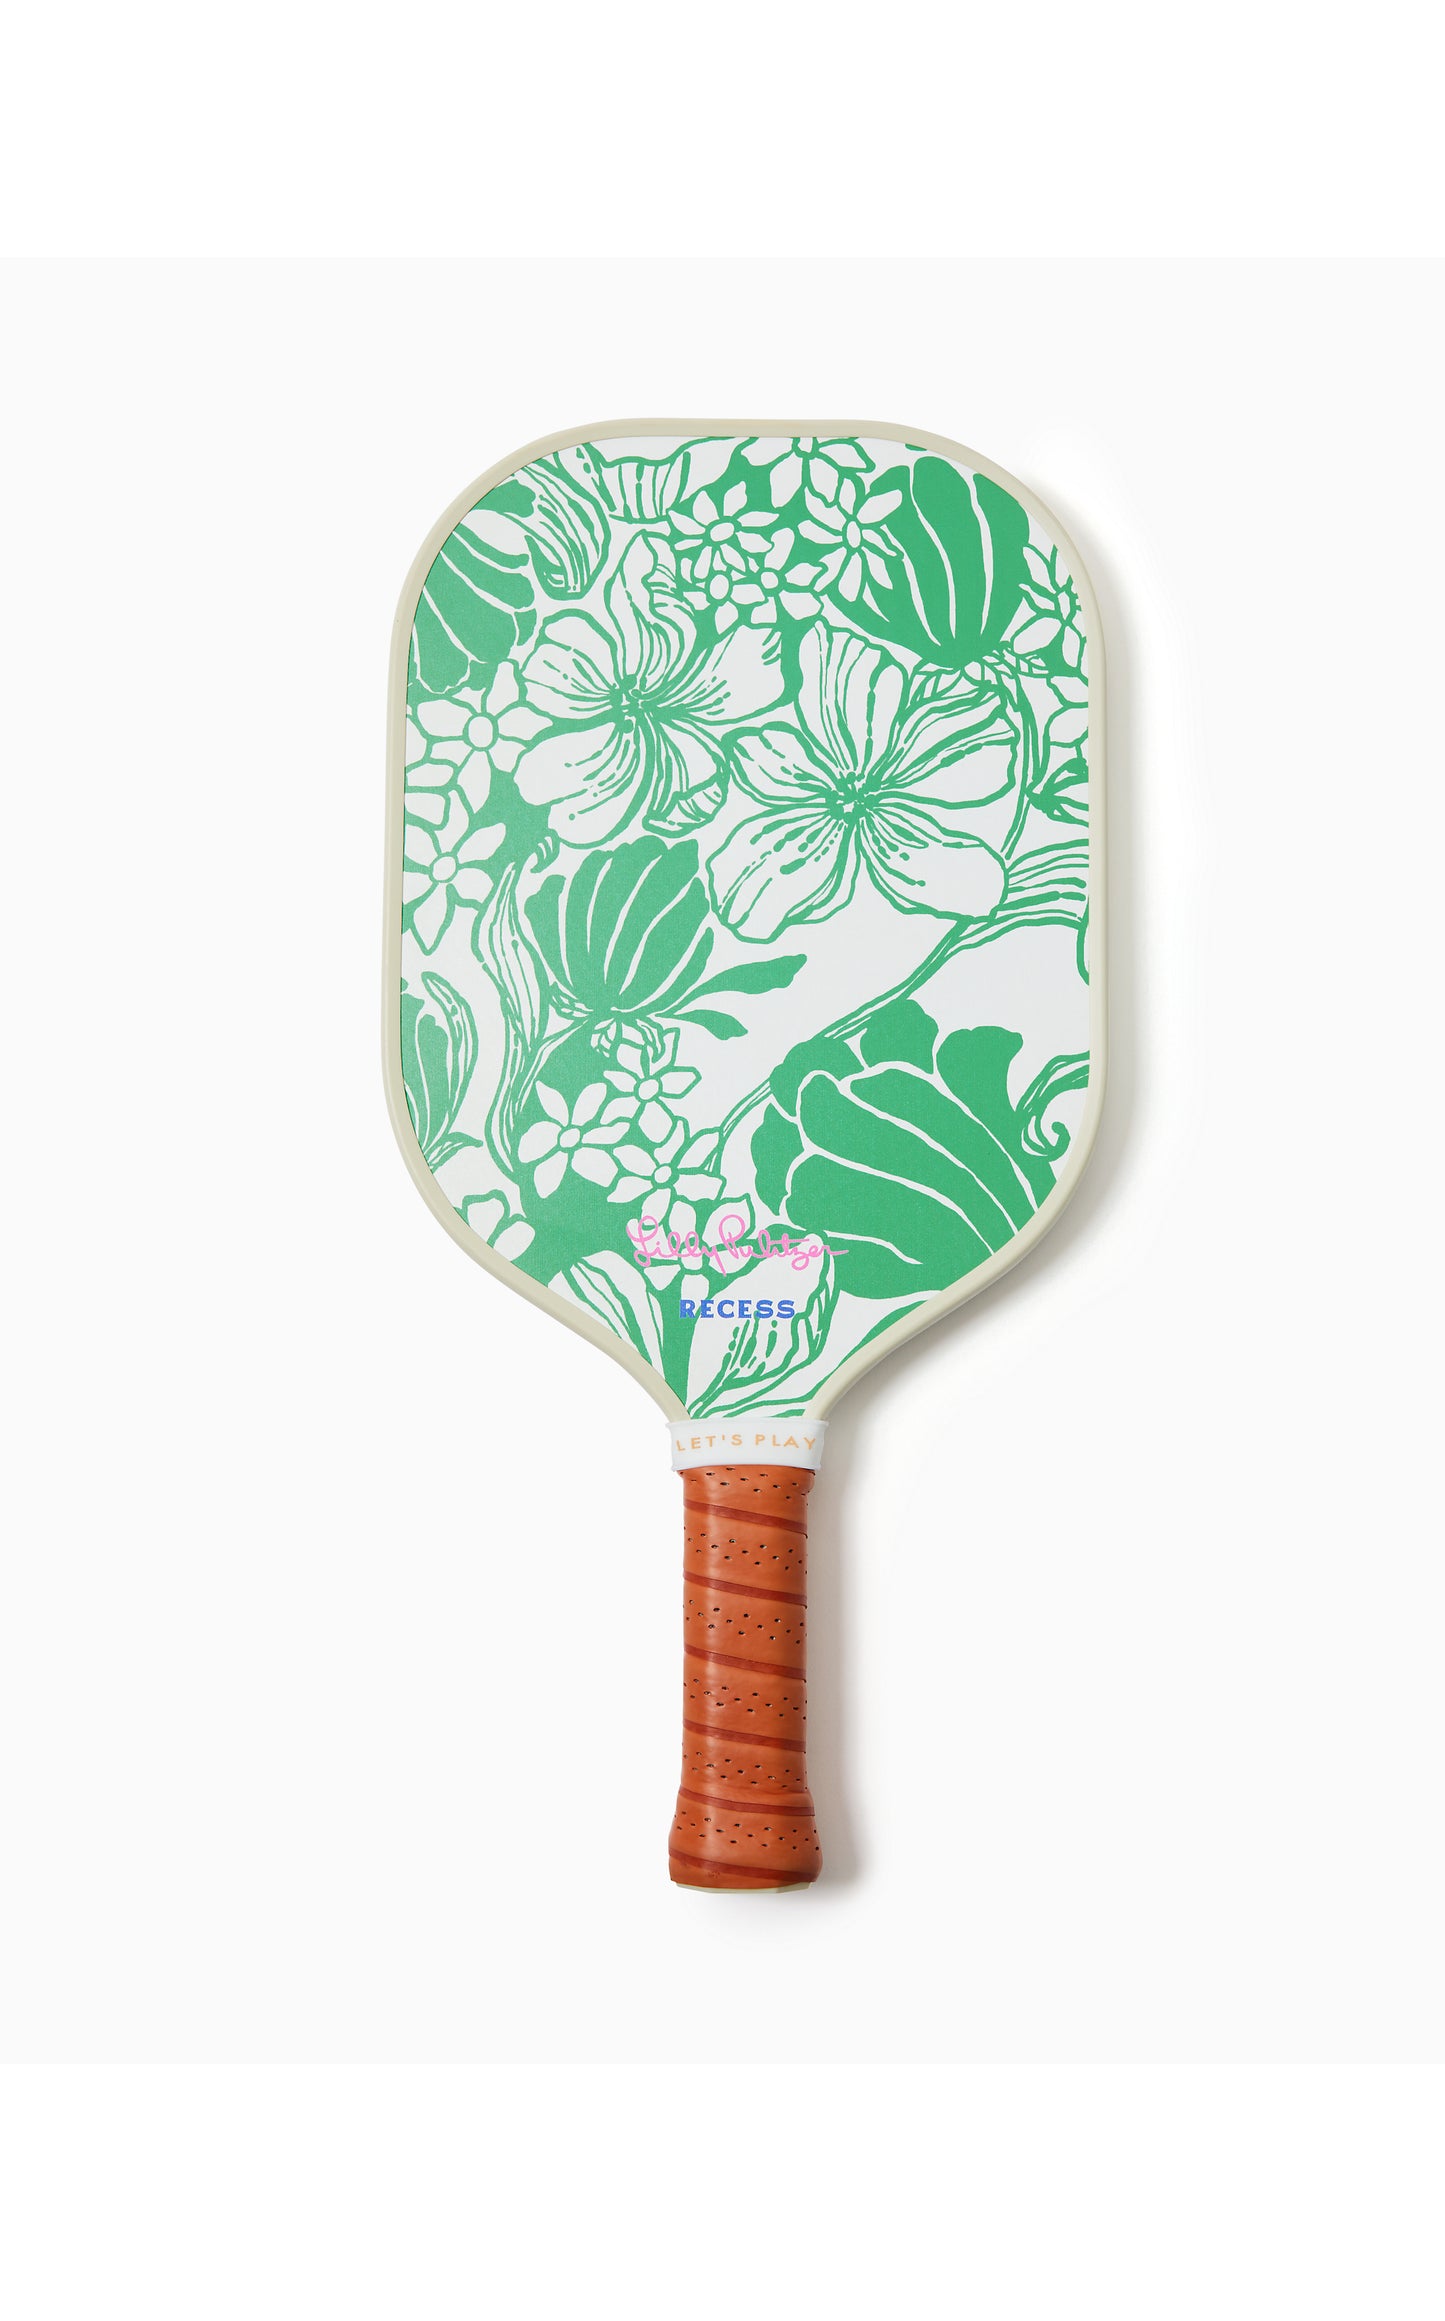 LILLY PULITZER x RECESS Pickleball Paddle in Spearmint Oversized Kiss My Tulips